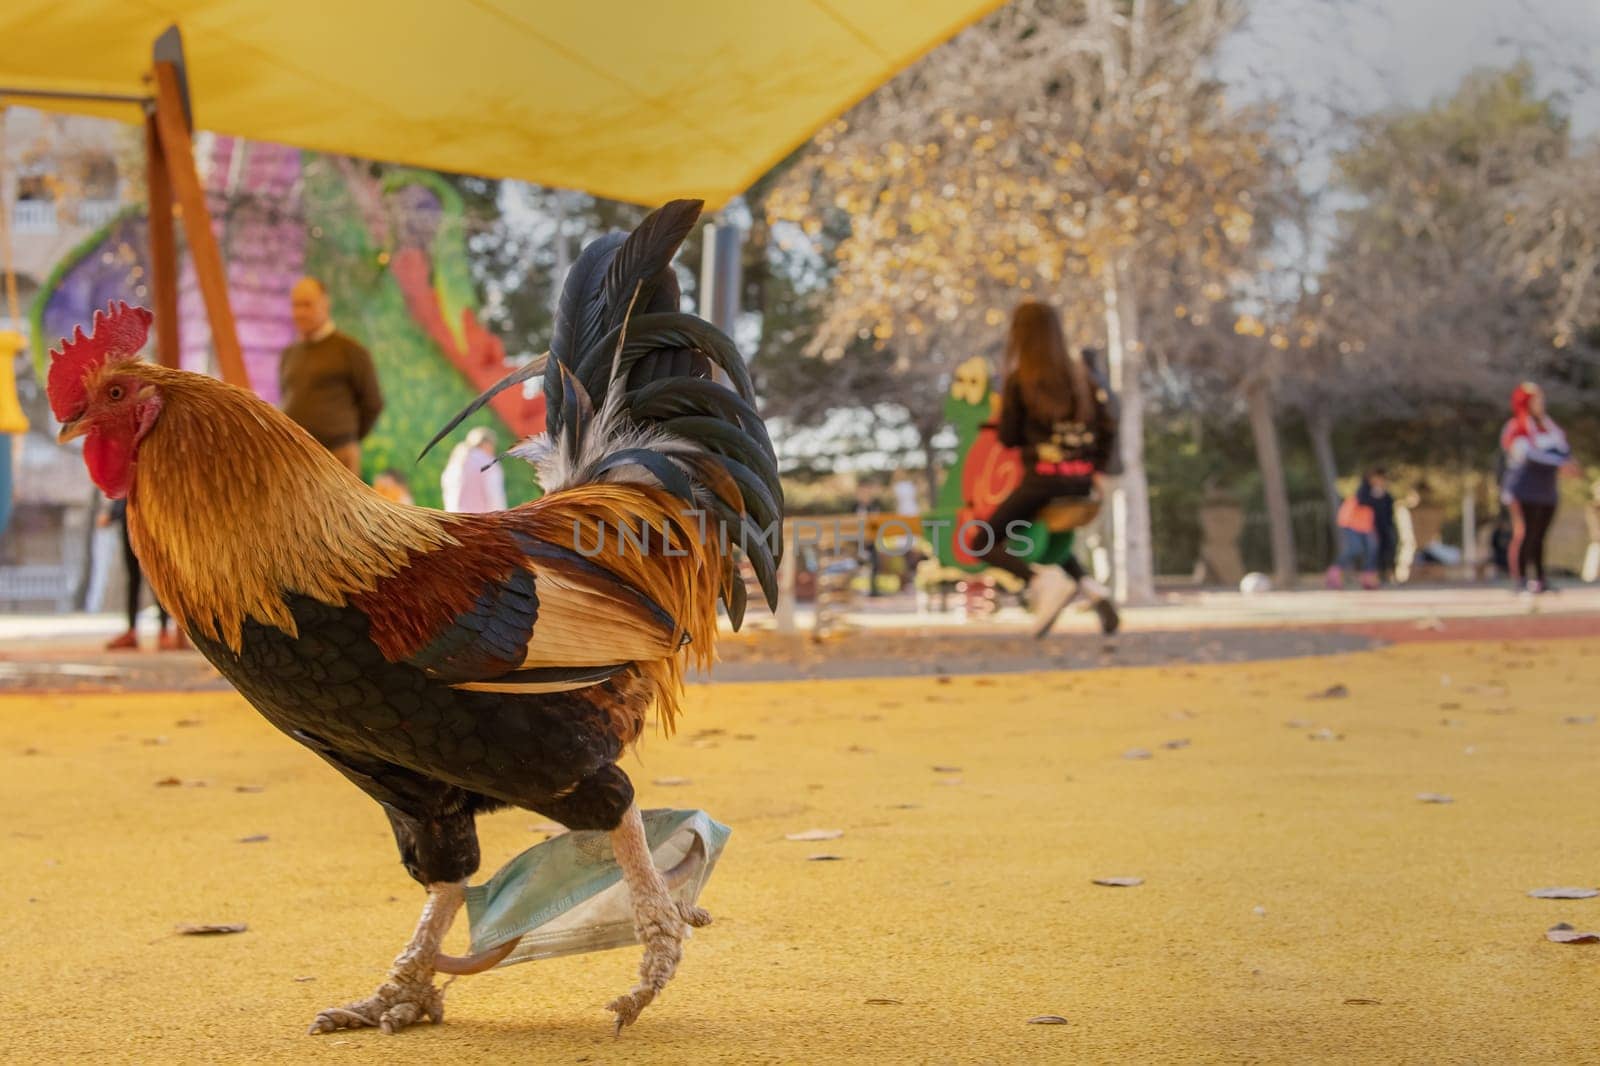 rooster walks through the park on the playground the close-up on the puttuha . High quality photo